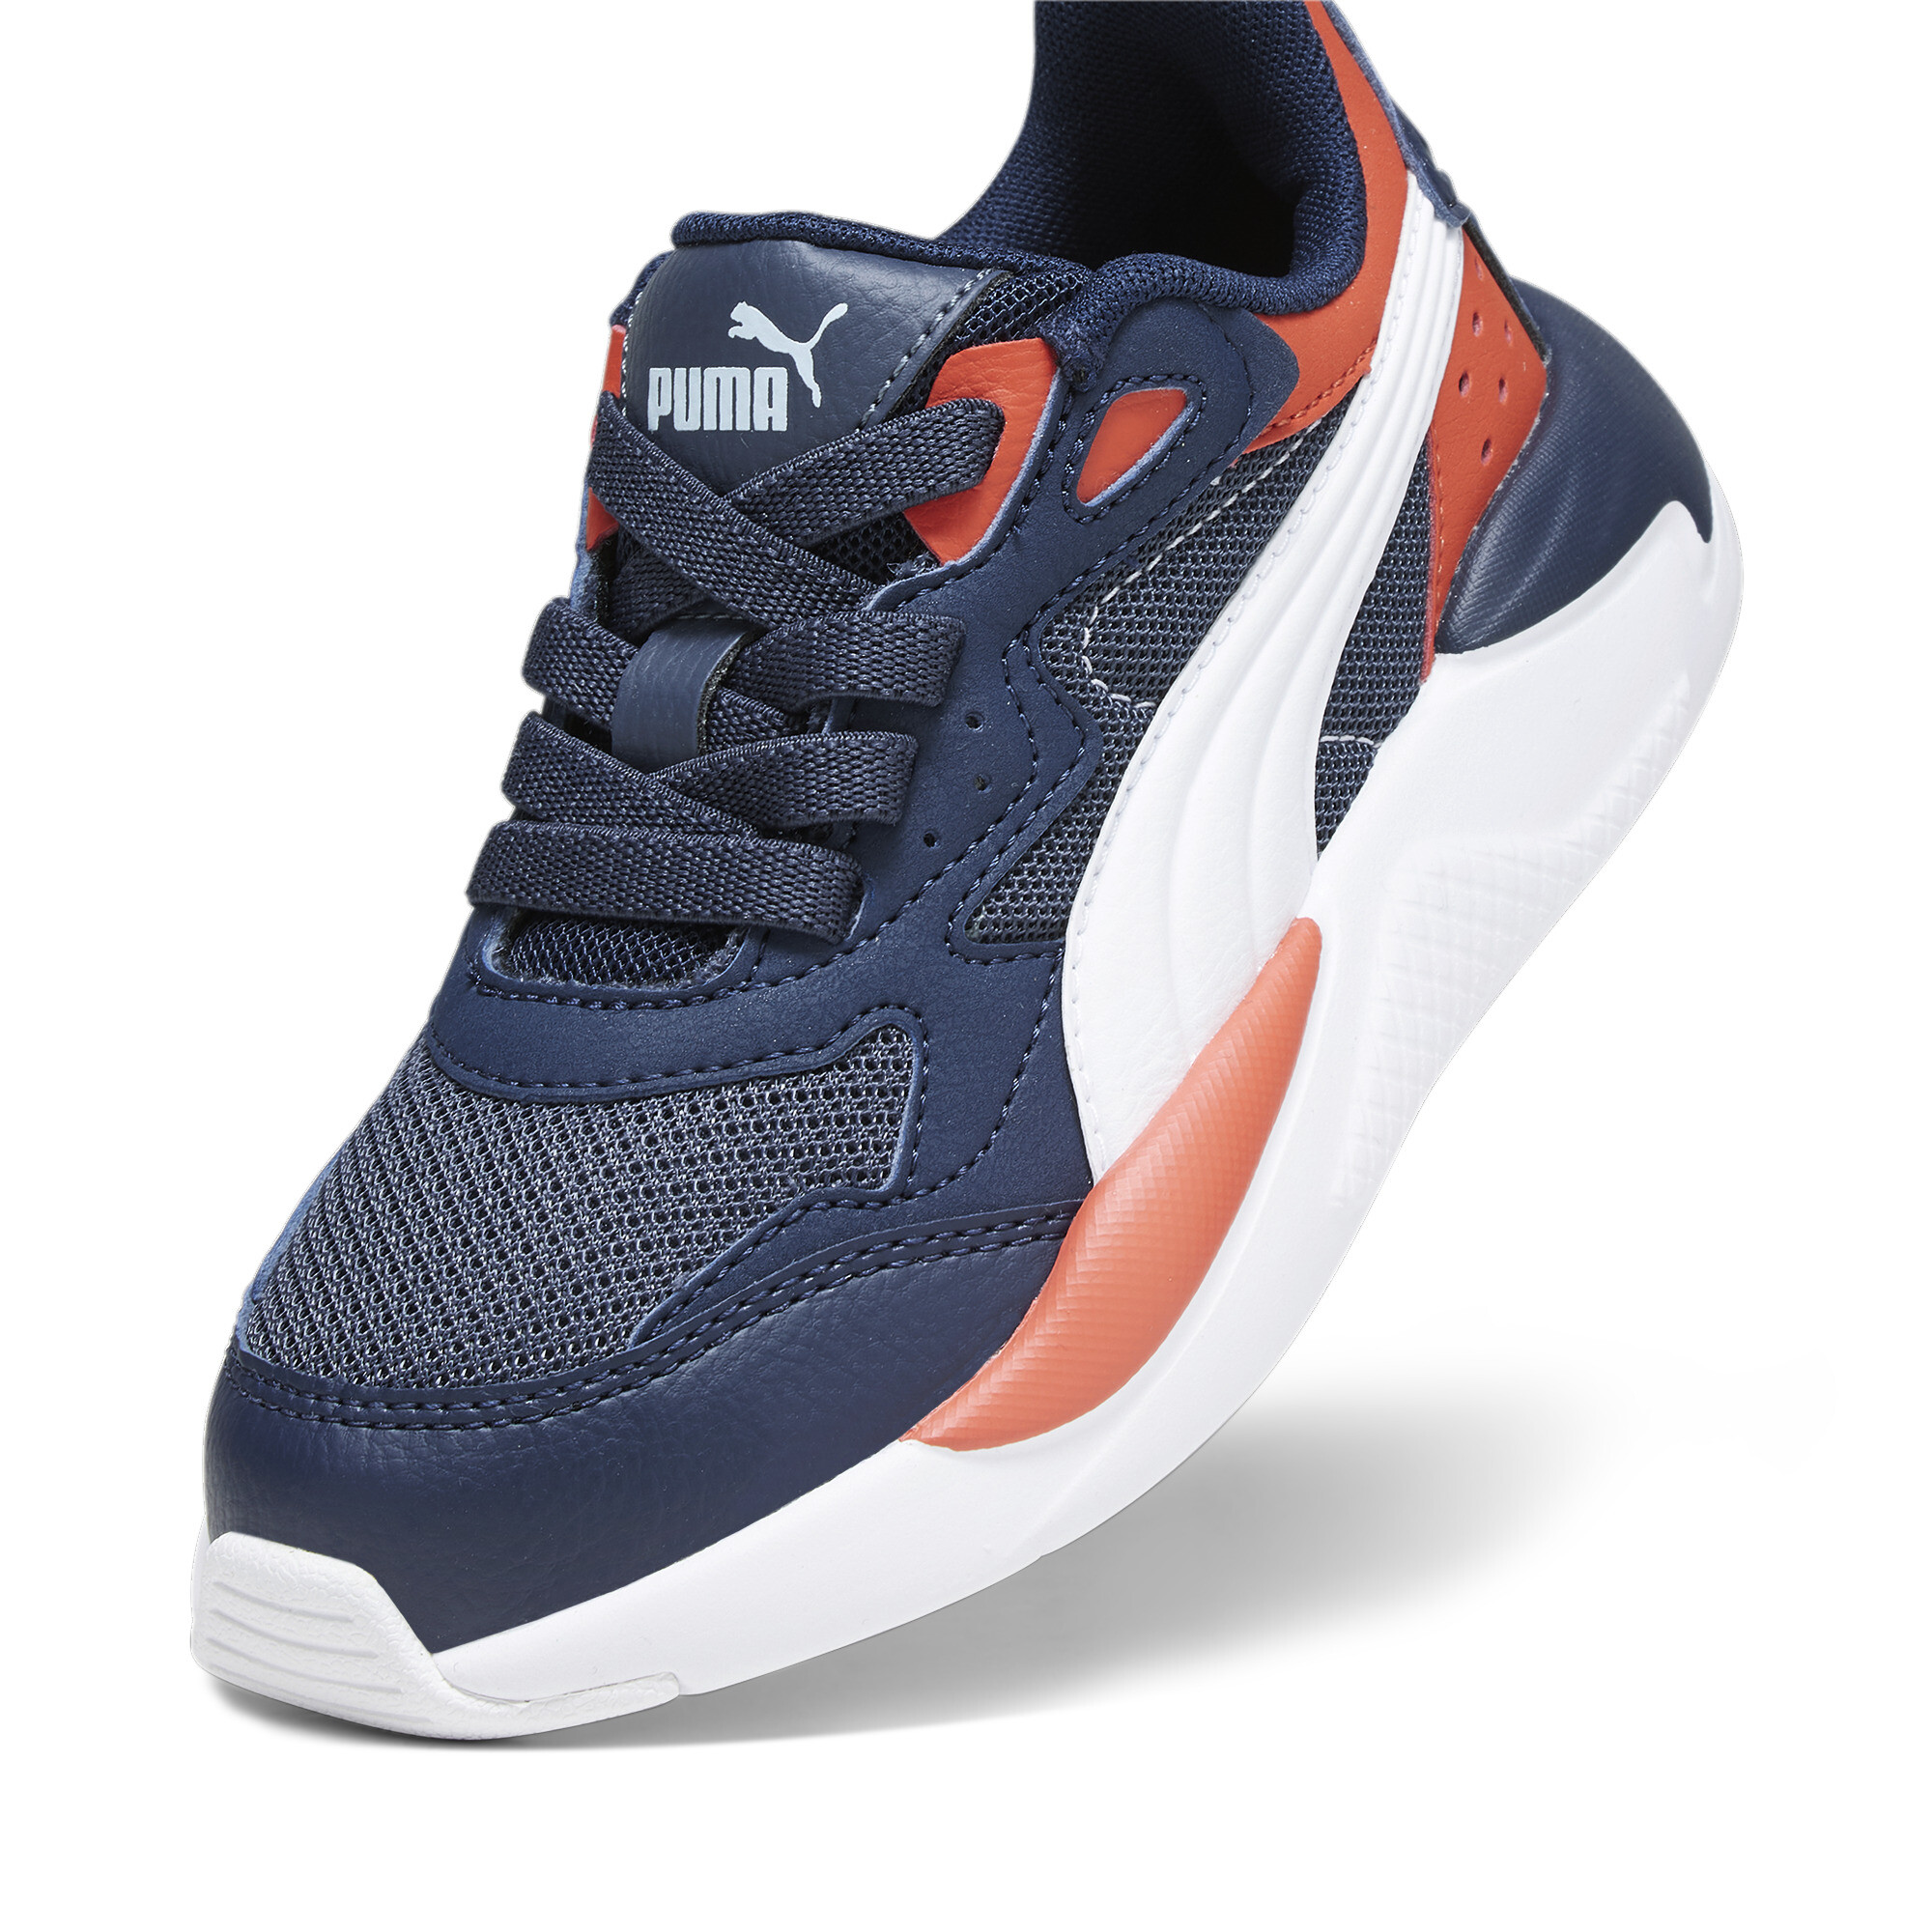 Puma X-Ray Speed AC Kids' Trainers, Blue, Size 31.5, Shoes